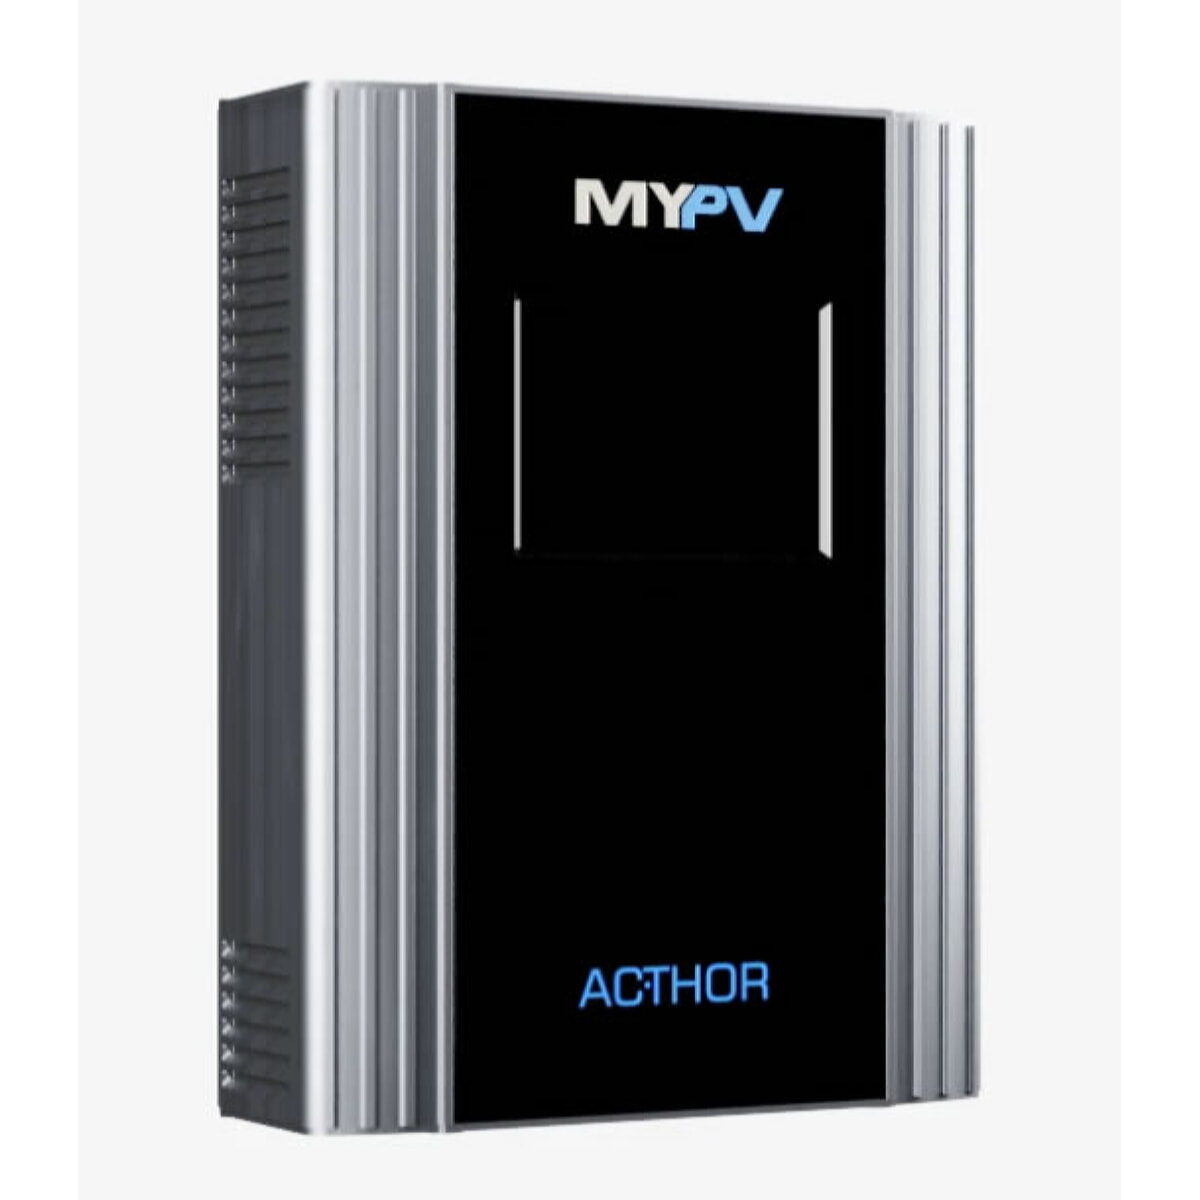 my-PV photovoltaic power manager AC THOR